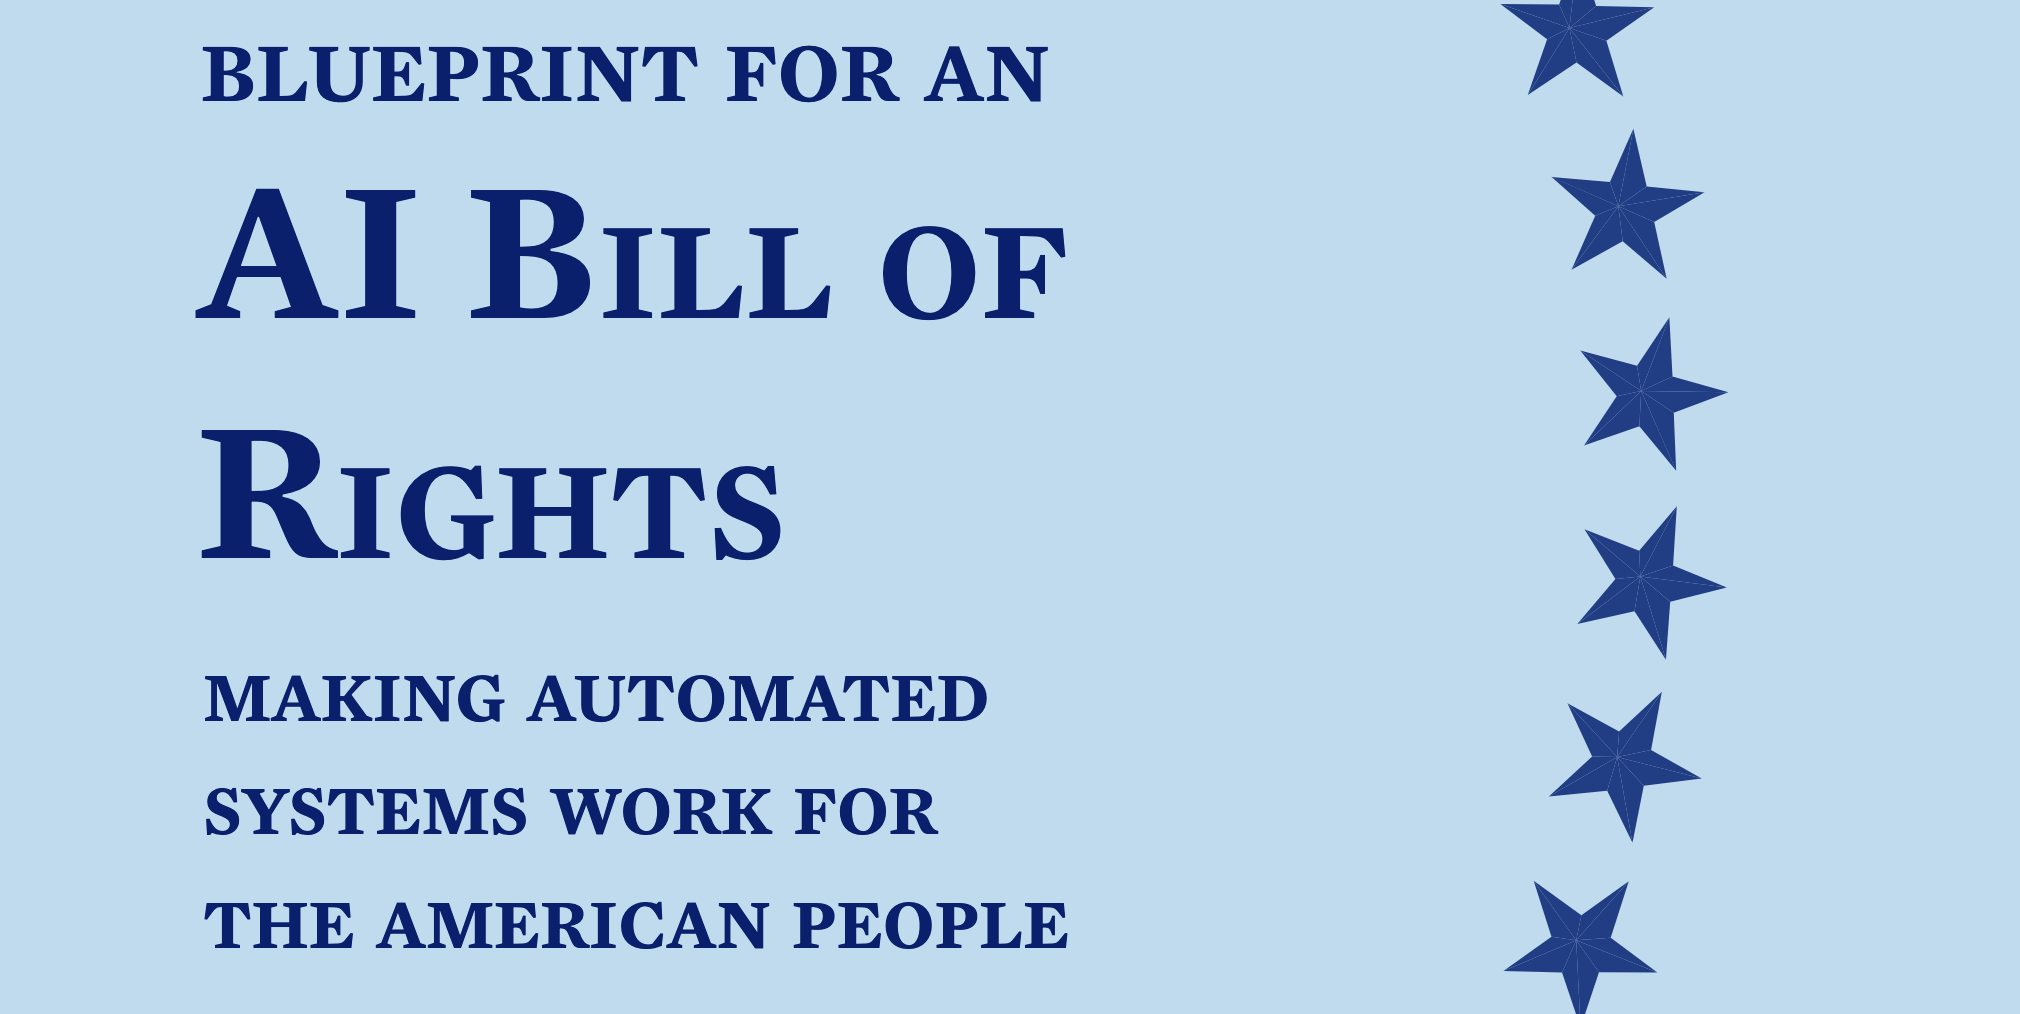 The White House Blueprint for an AI Bill of Rights